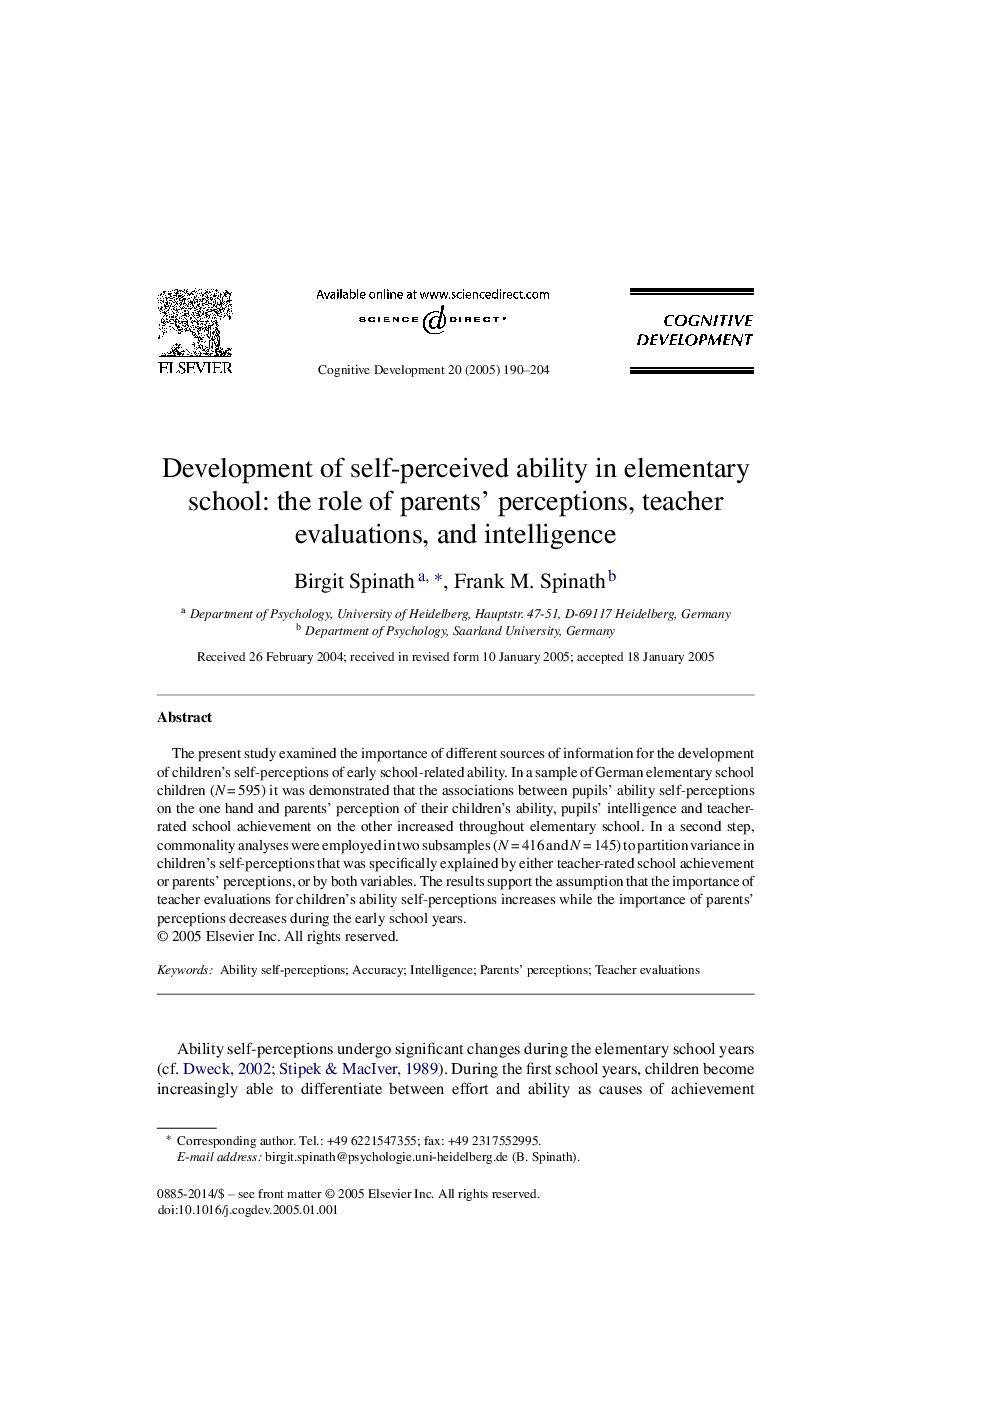 Development of self-perceived ability in elementary school: the role of parents' perceptions, teacher evaluations, and intelligence